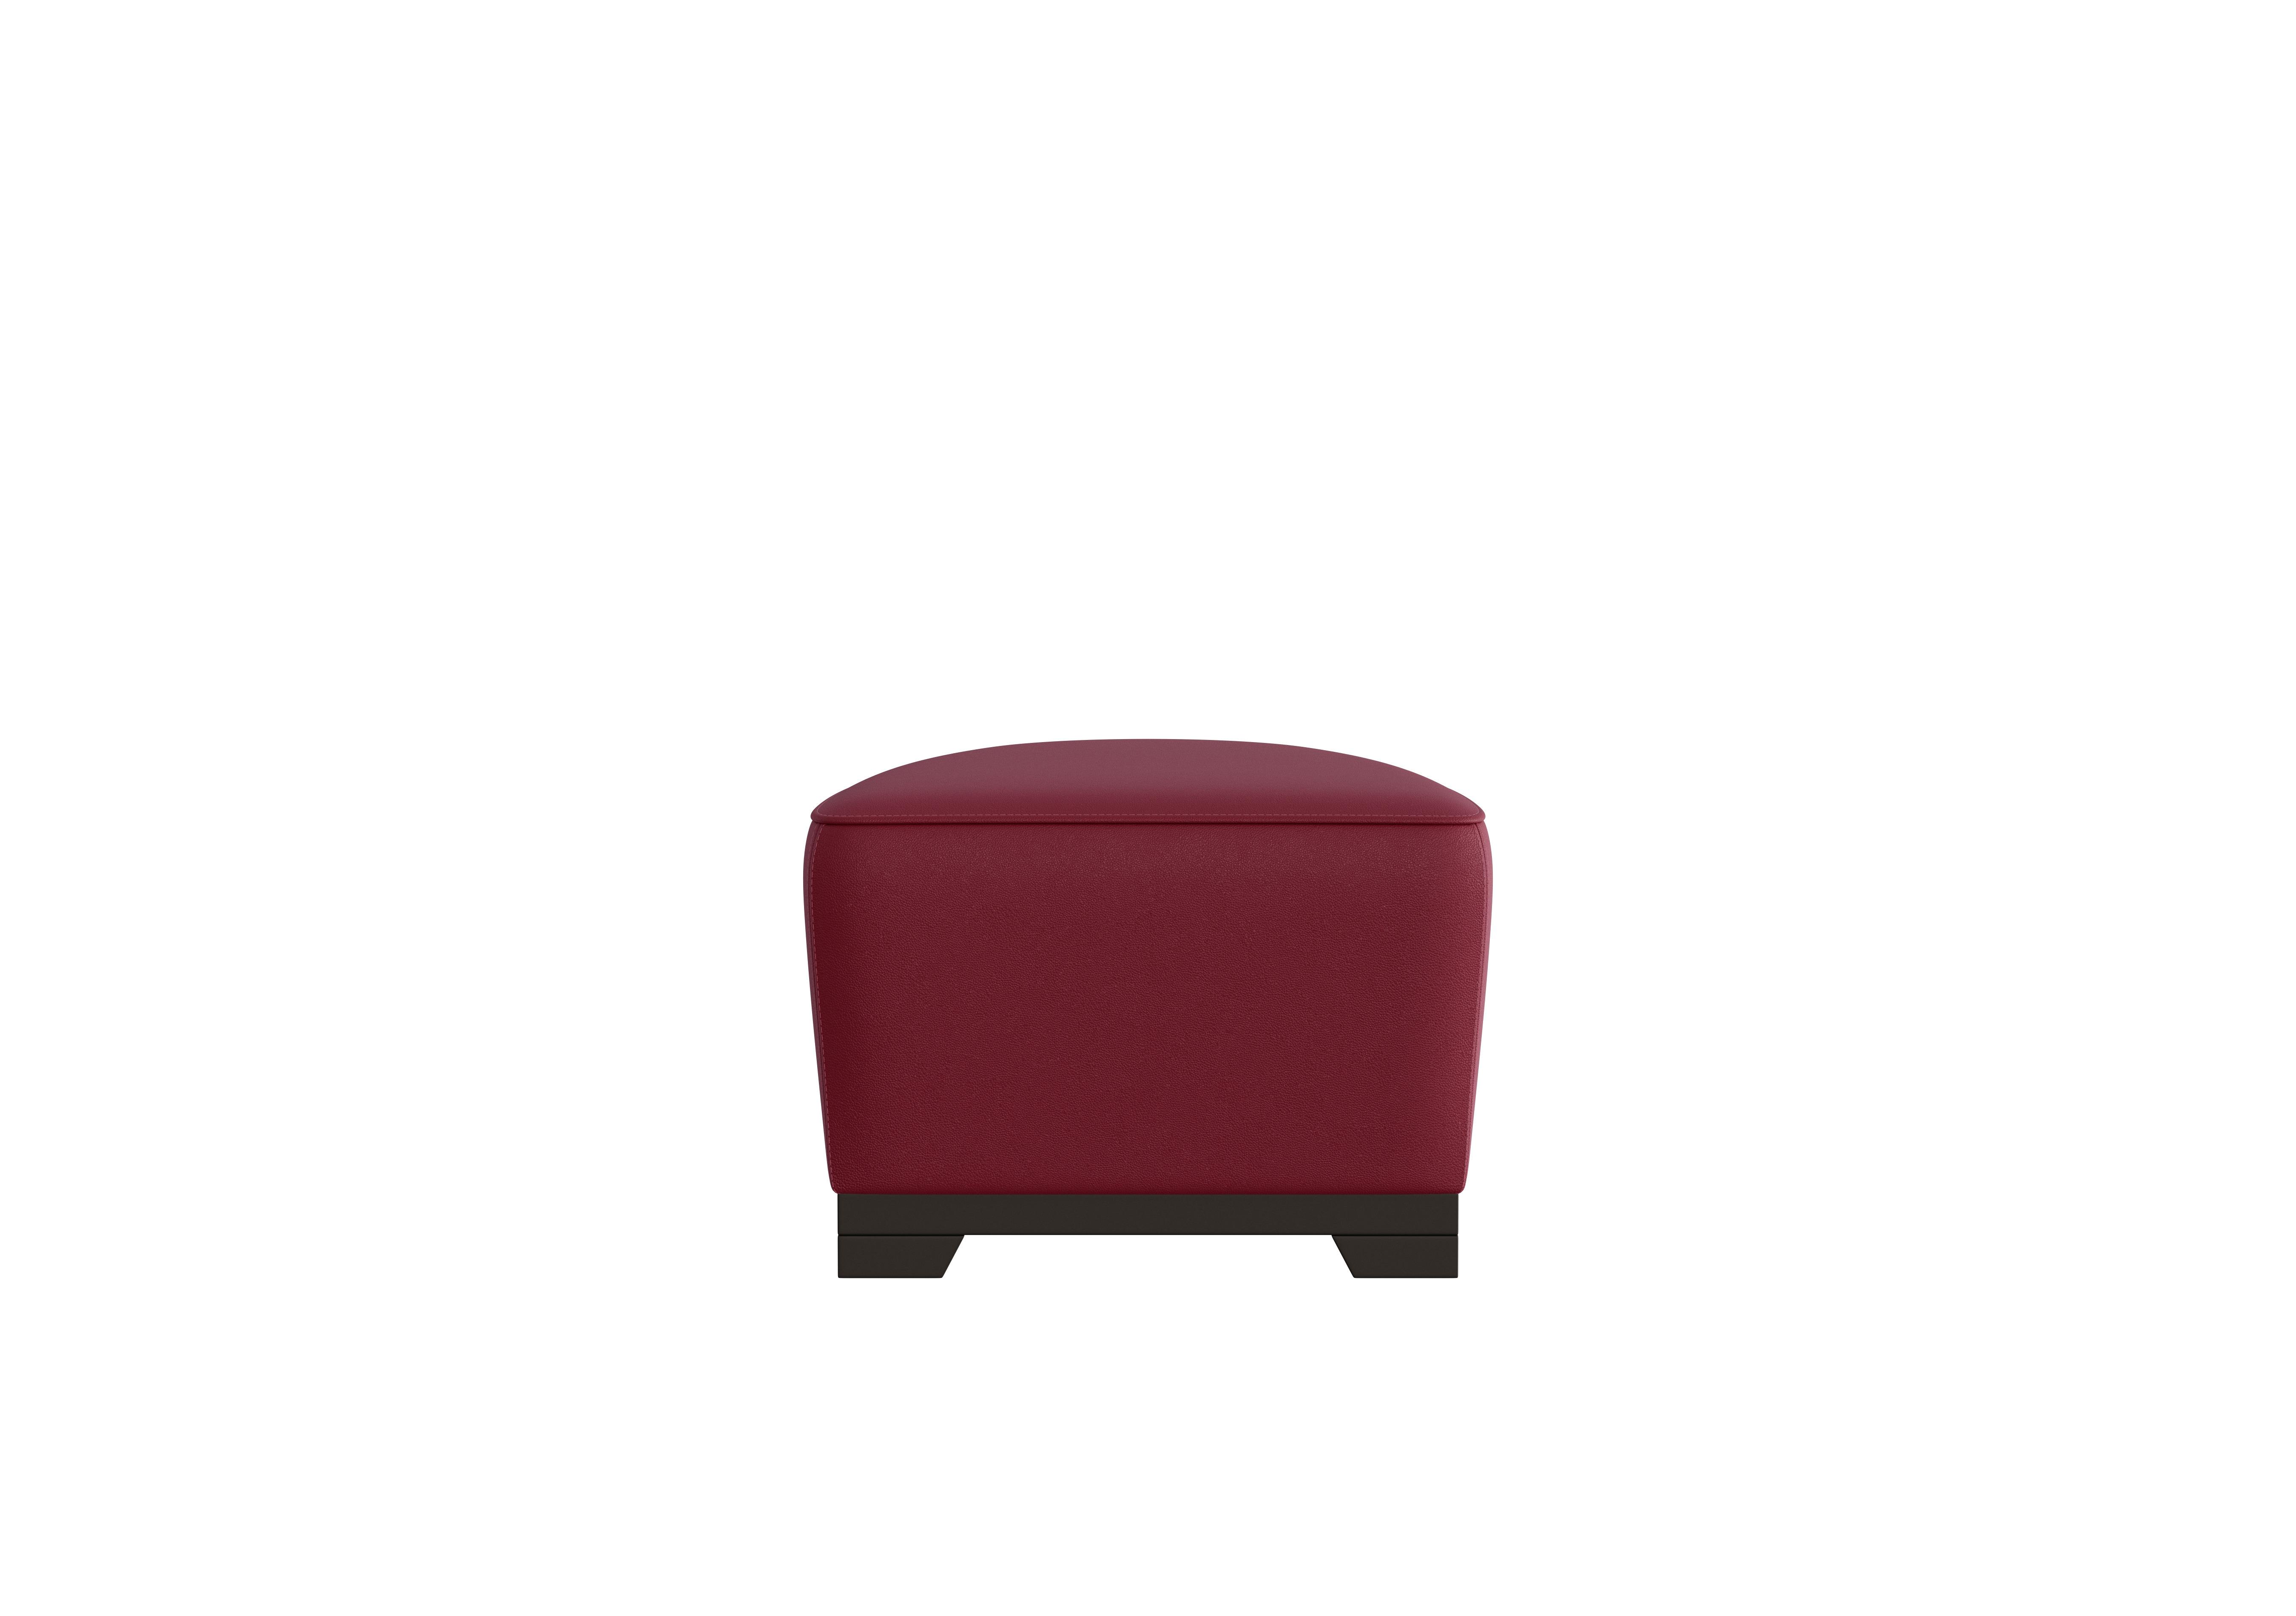 Ketty Leather D-Shaped Footstool in Dali Bordeaux 1521 on Furniture Village